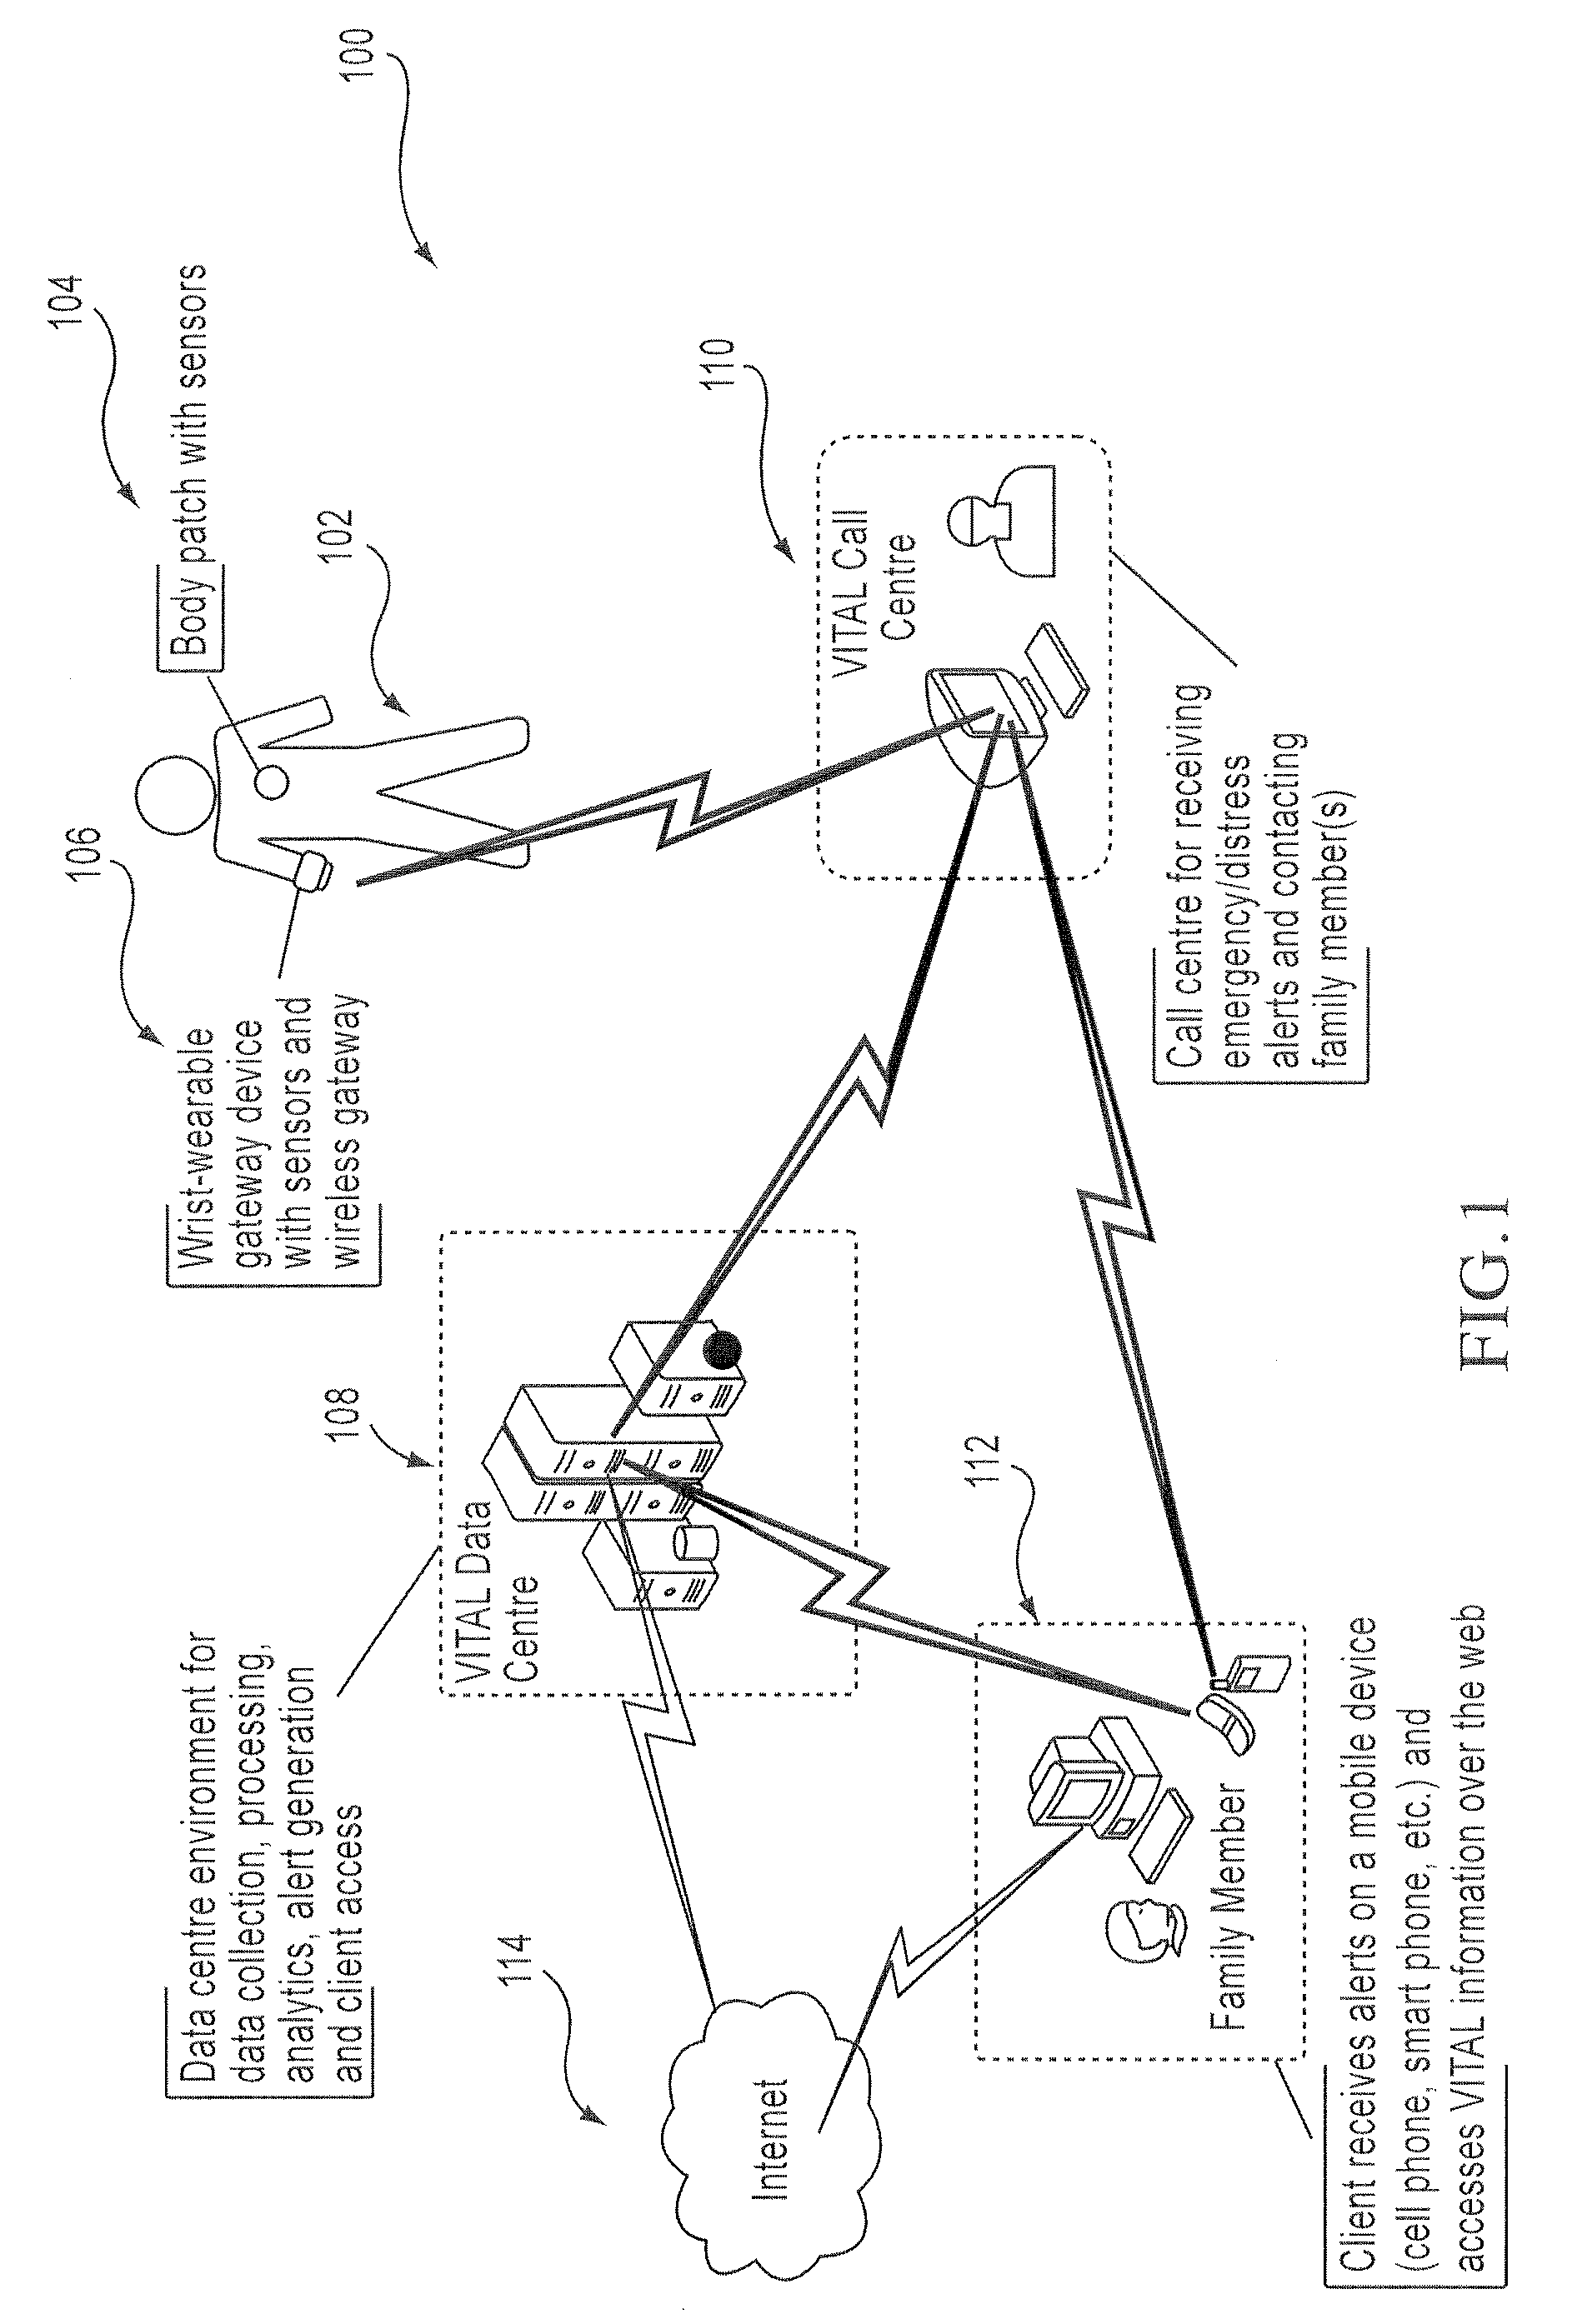 System and method for physlological data readings,
transmission and presentation